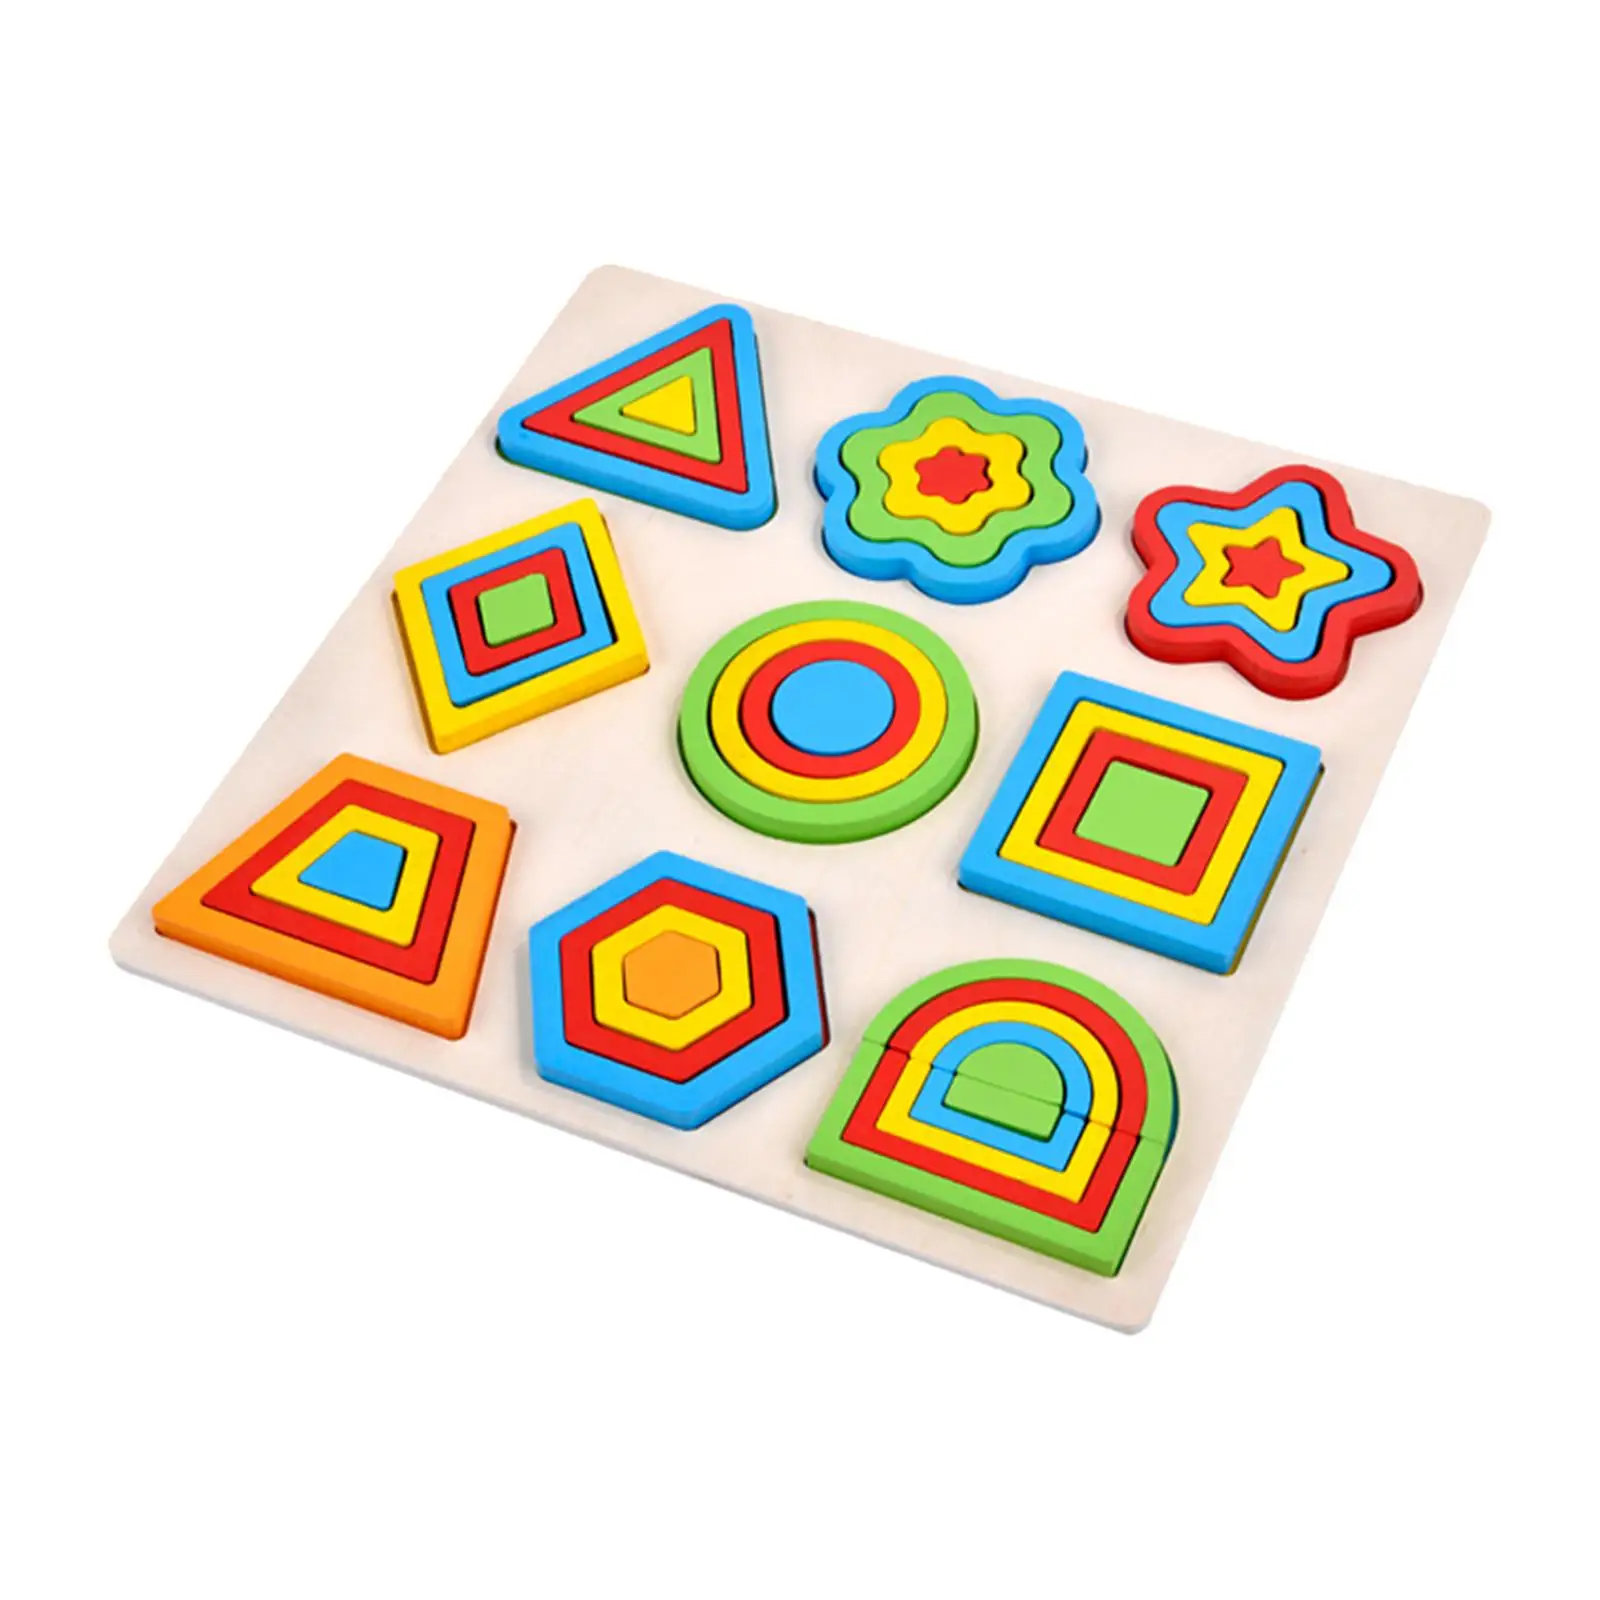 Wooden Puzzle Fine Motor Skills Montessori Colorful Teaching Aids Manipulative Puzzle for Kids Girls Birthday Gift